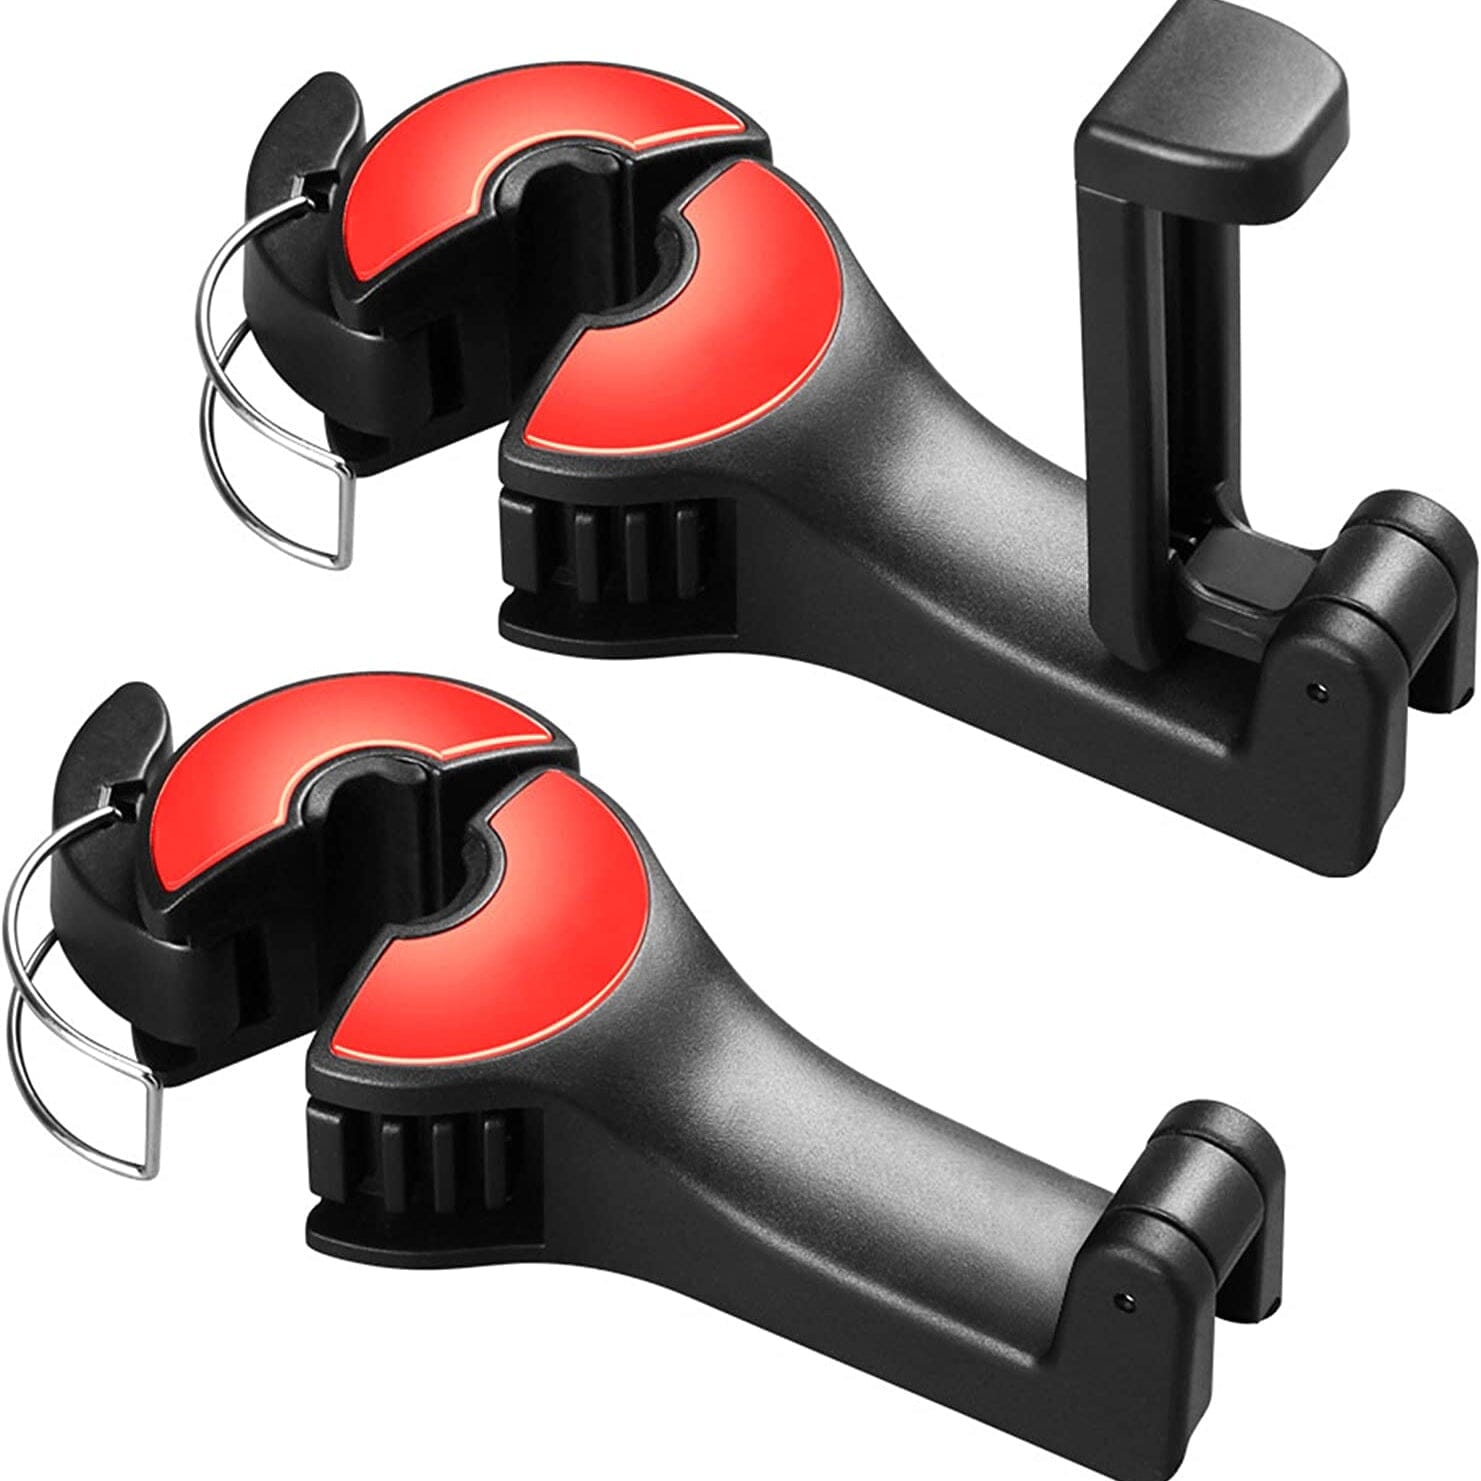 2-Pack: 2-in-1 Car Seat Hooks for Purses and Bags with Phone Holder